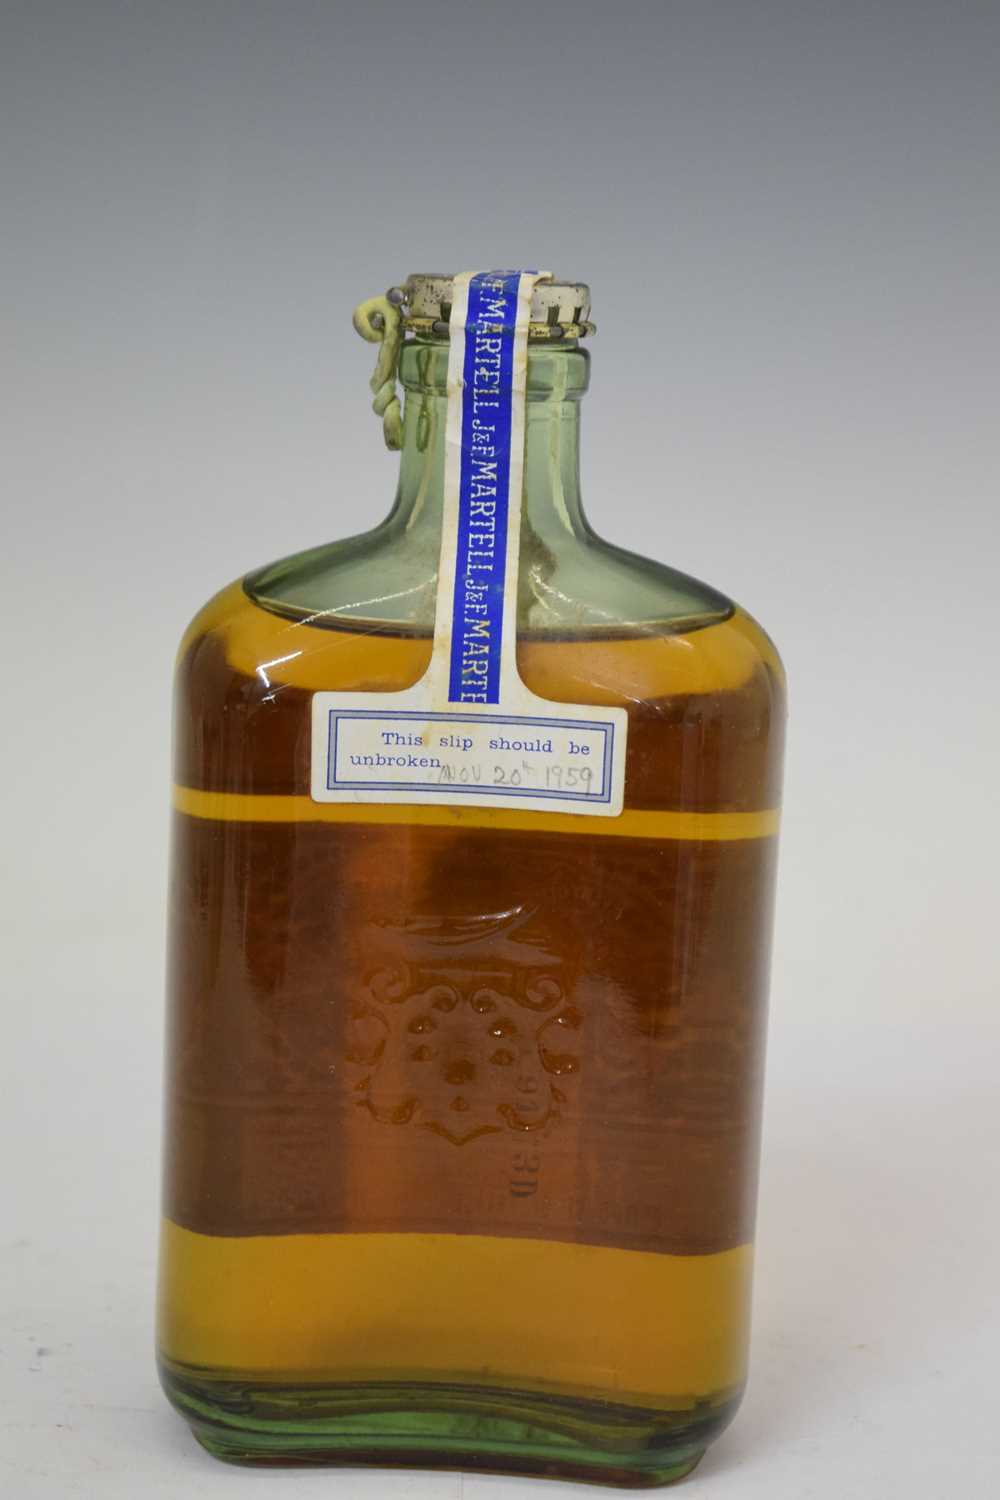 1959 Martell 3-star cognac 34cl - Image 2 of 4